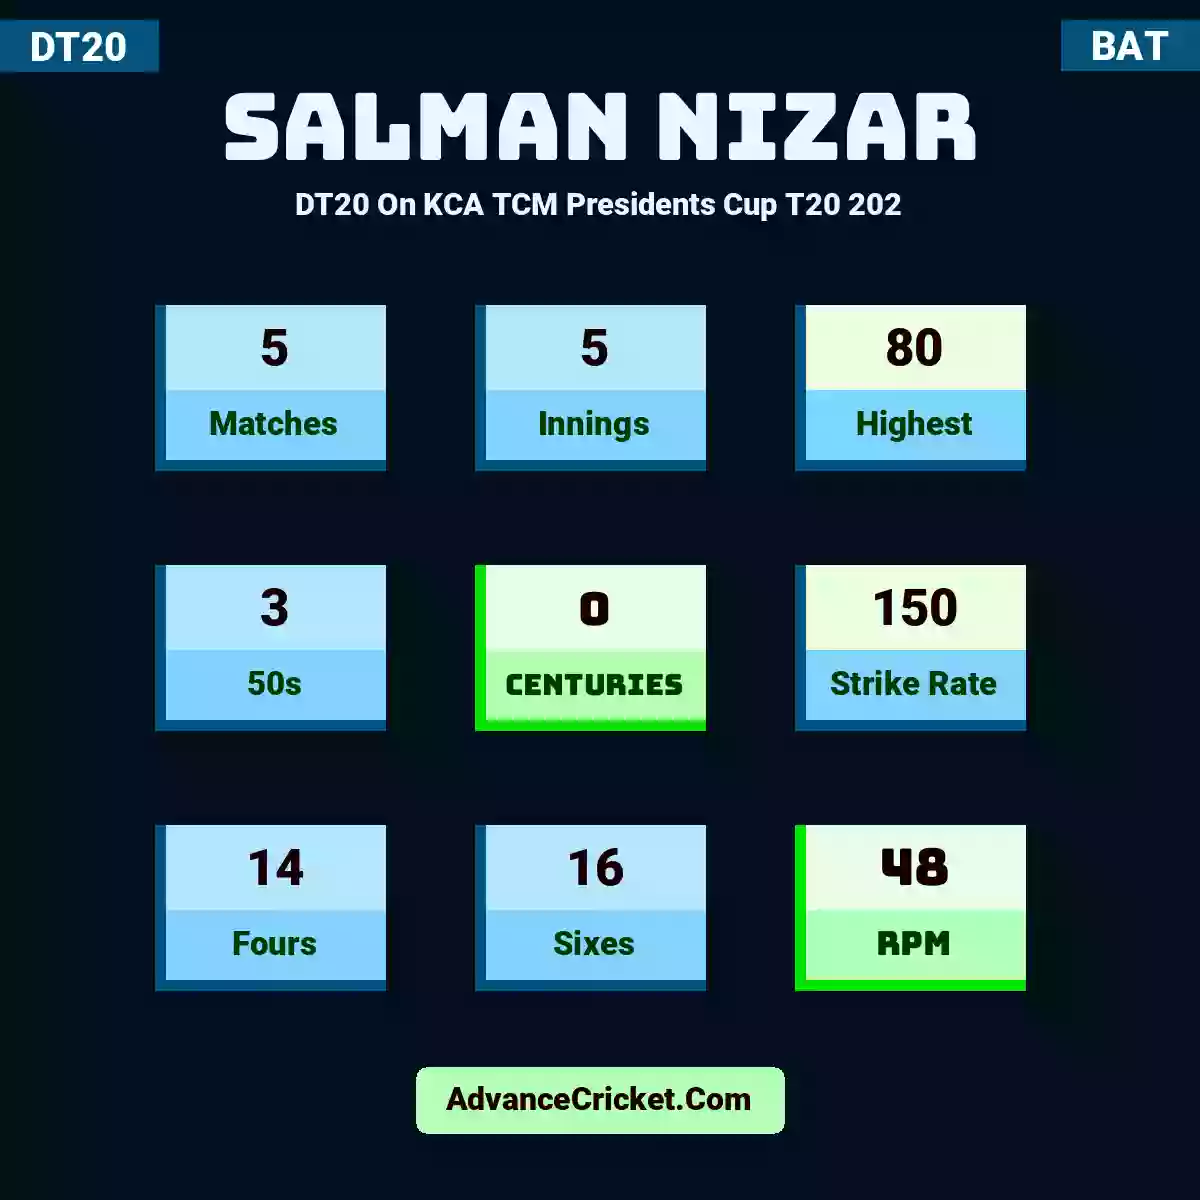 Salman Nizar DT20  On KCA TCM Presidents Cup T20 202, Salman Nizar played 5 matches, scored 80 runs as highest, 3 half-centuries, and 0 centuries, with a strike rate of 150. S.Nizar hit 14 fours and 16 sixes, with an RPM of 48.